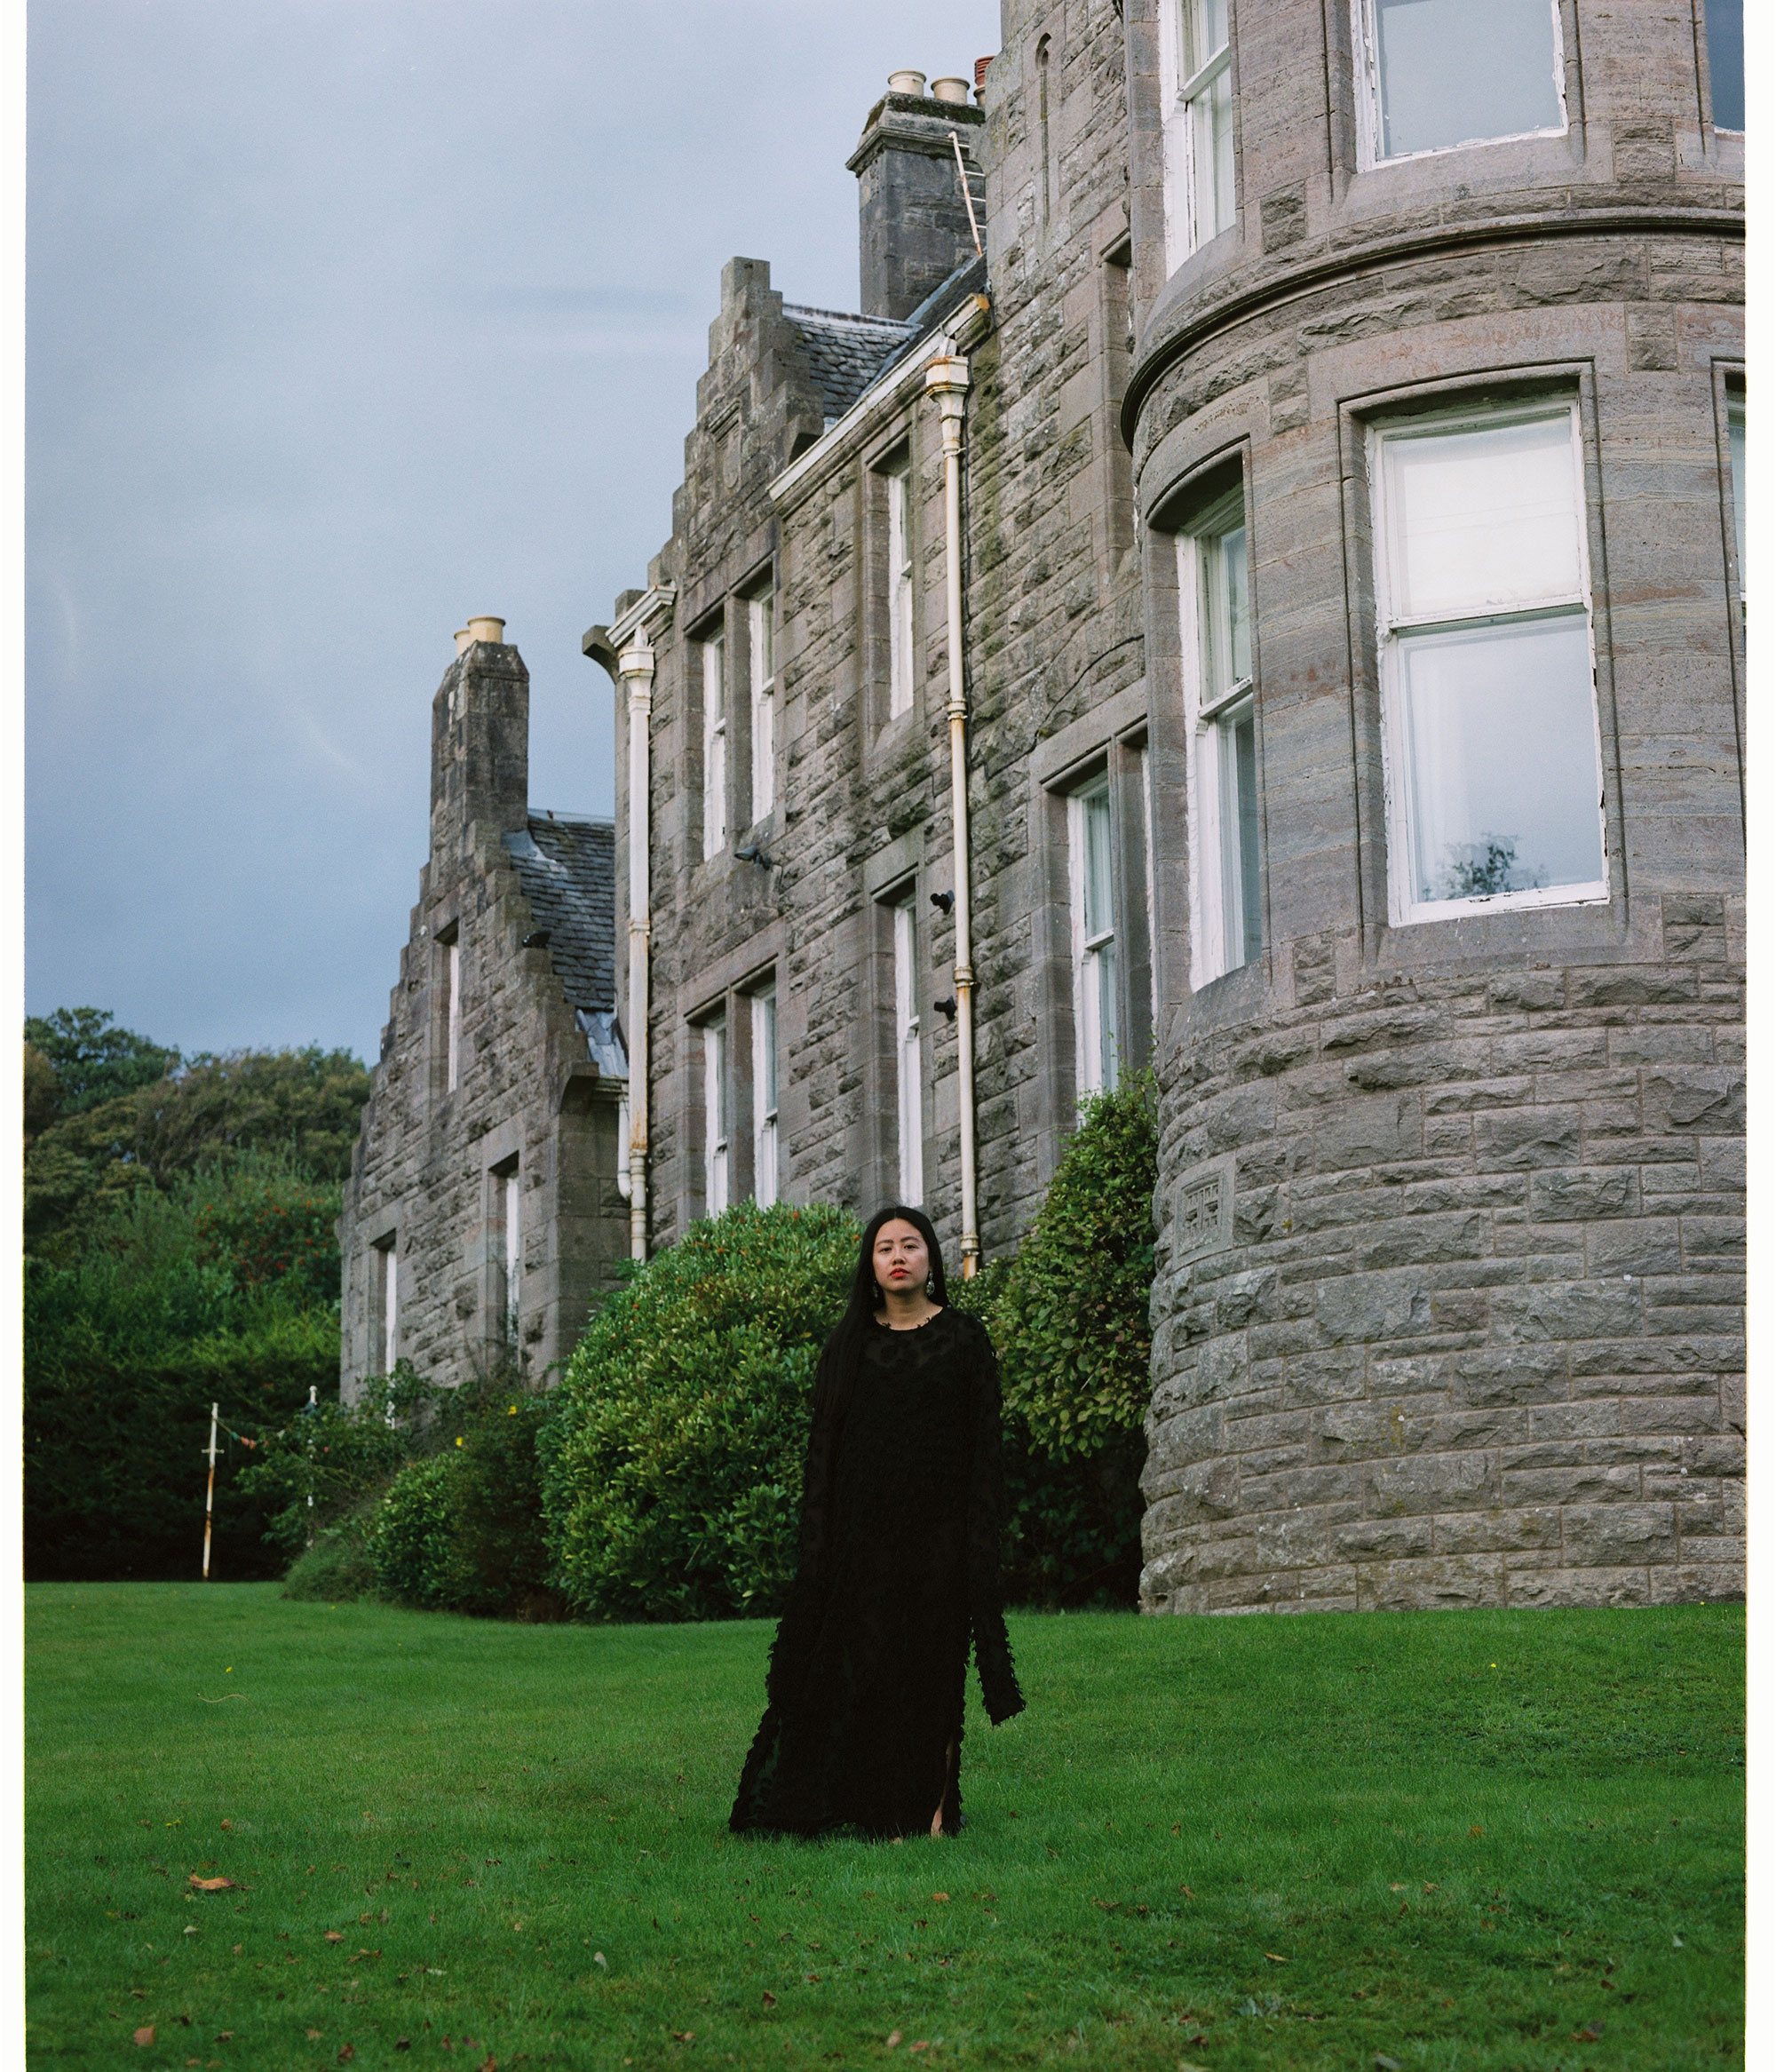 Analog Travel Diary from Scotland shot w/ Mamiya RB67 on FujiPro 400H / Analog Travel Diary from Scotland on Mamiya 67 Fuji 400H / Western Highlands & Loch Lomond by May Huynh for iHeartAlice.com – Travel, Lifestyle & Fashionblog by Alice M. Huynh